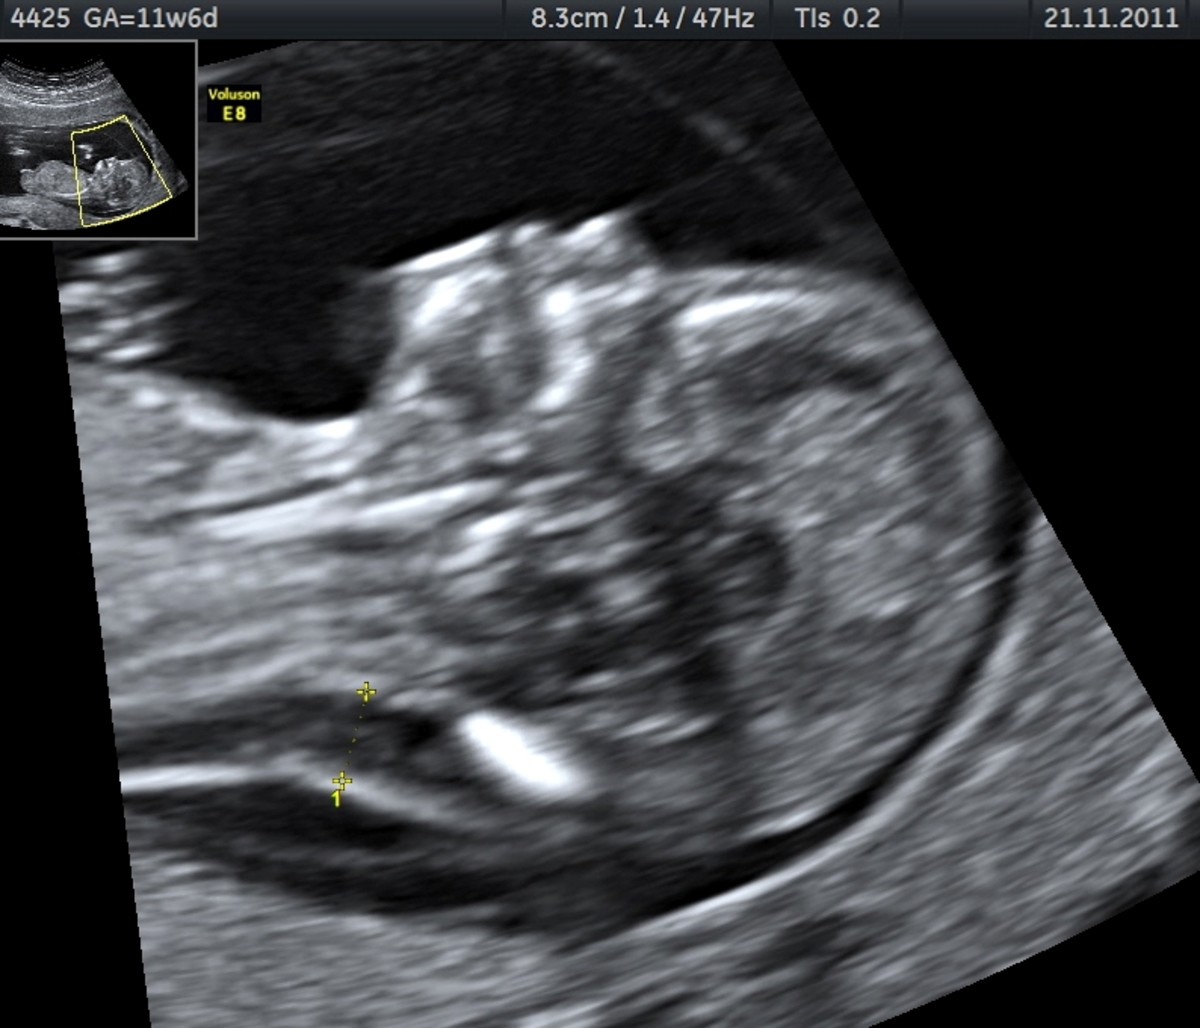 Edema in the nuchal fold and an absence of a nasal bone are observed in this ultrasound at 11 weeks of gestation. This baby has Trisomy 21 (Down Syndrome), as confirmed by Chorionic Villus Sampling testing. 